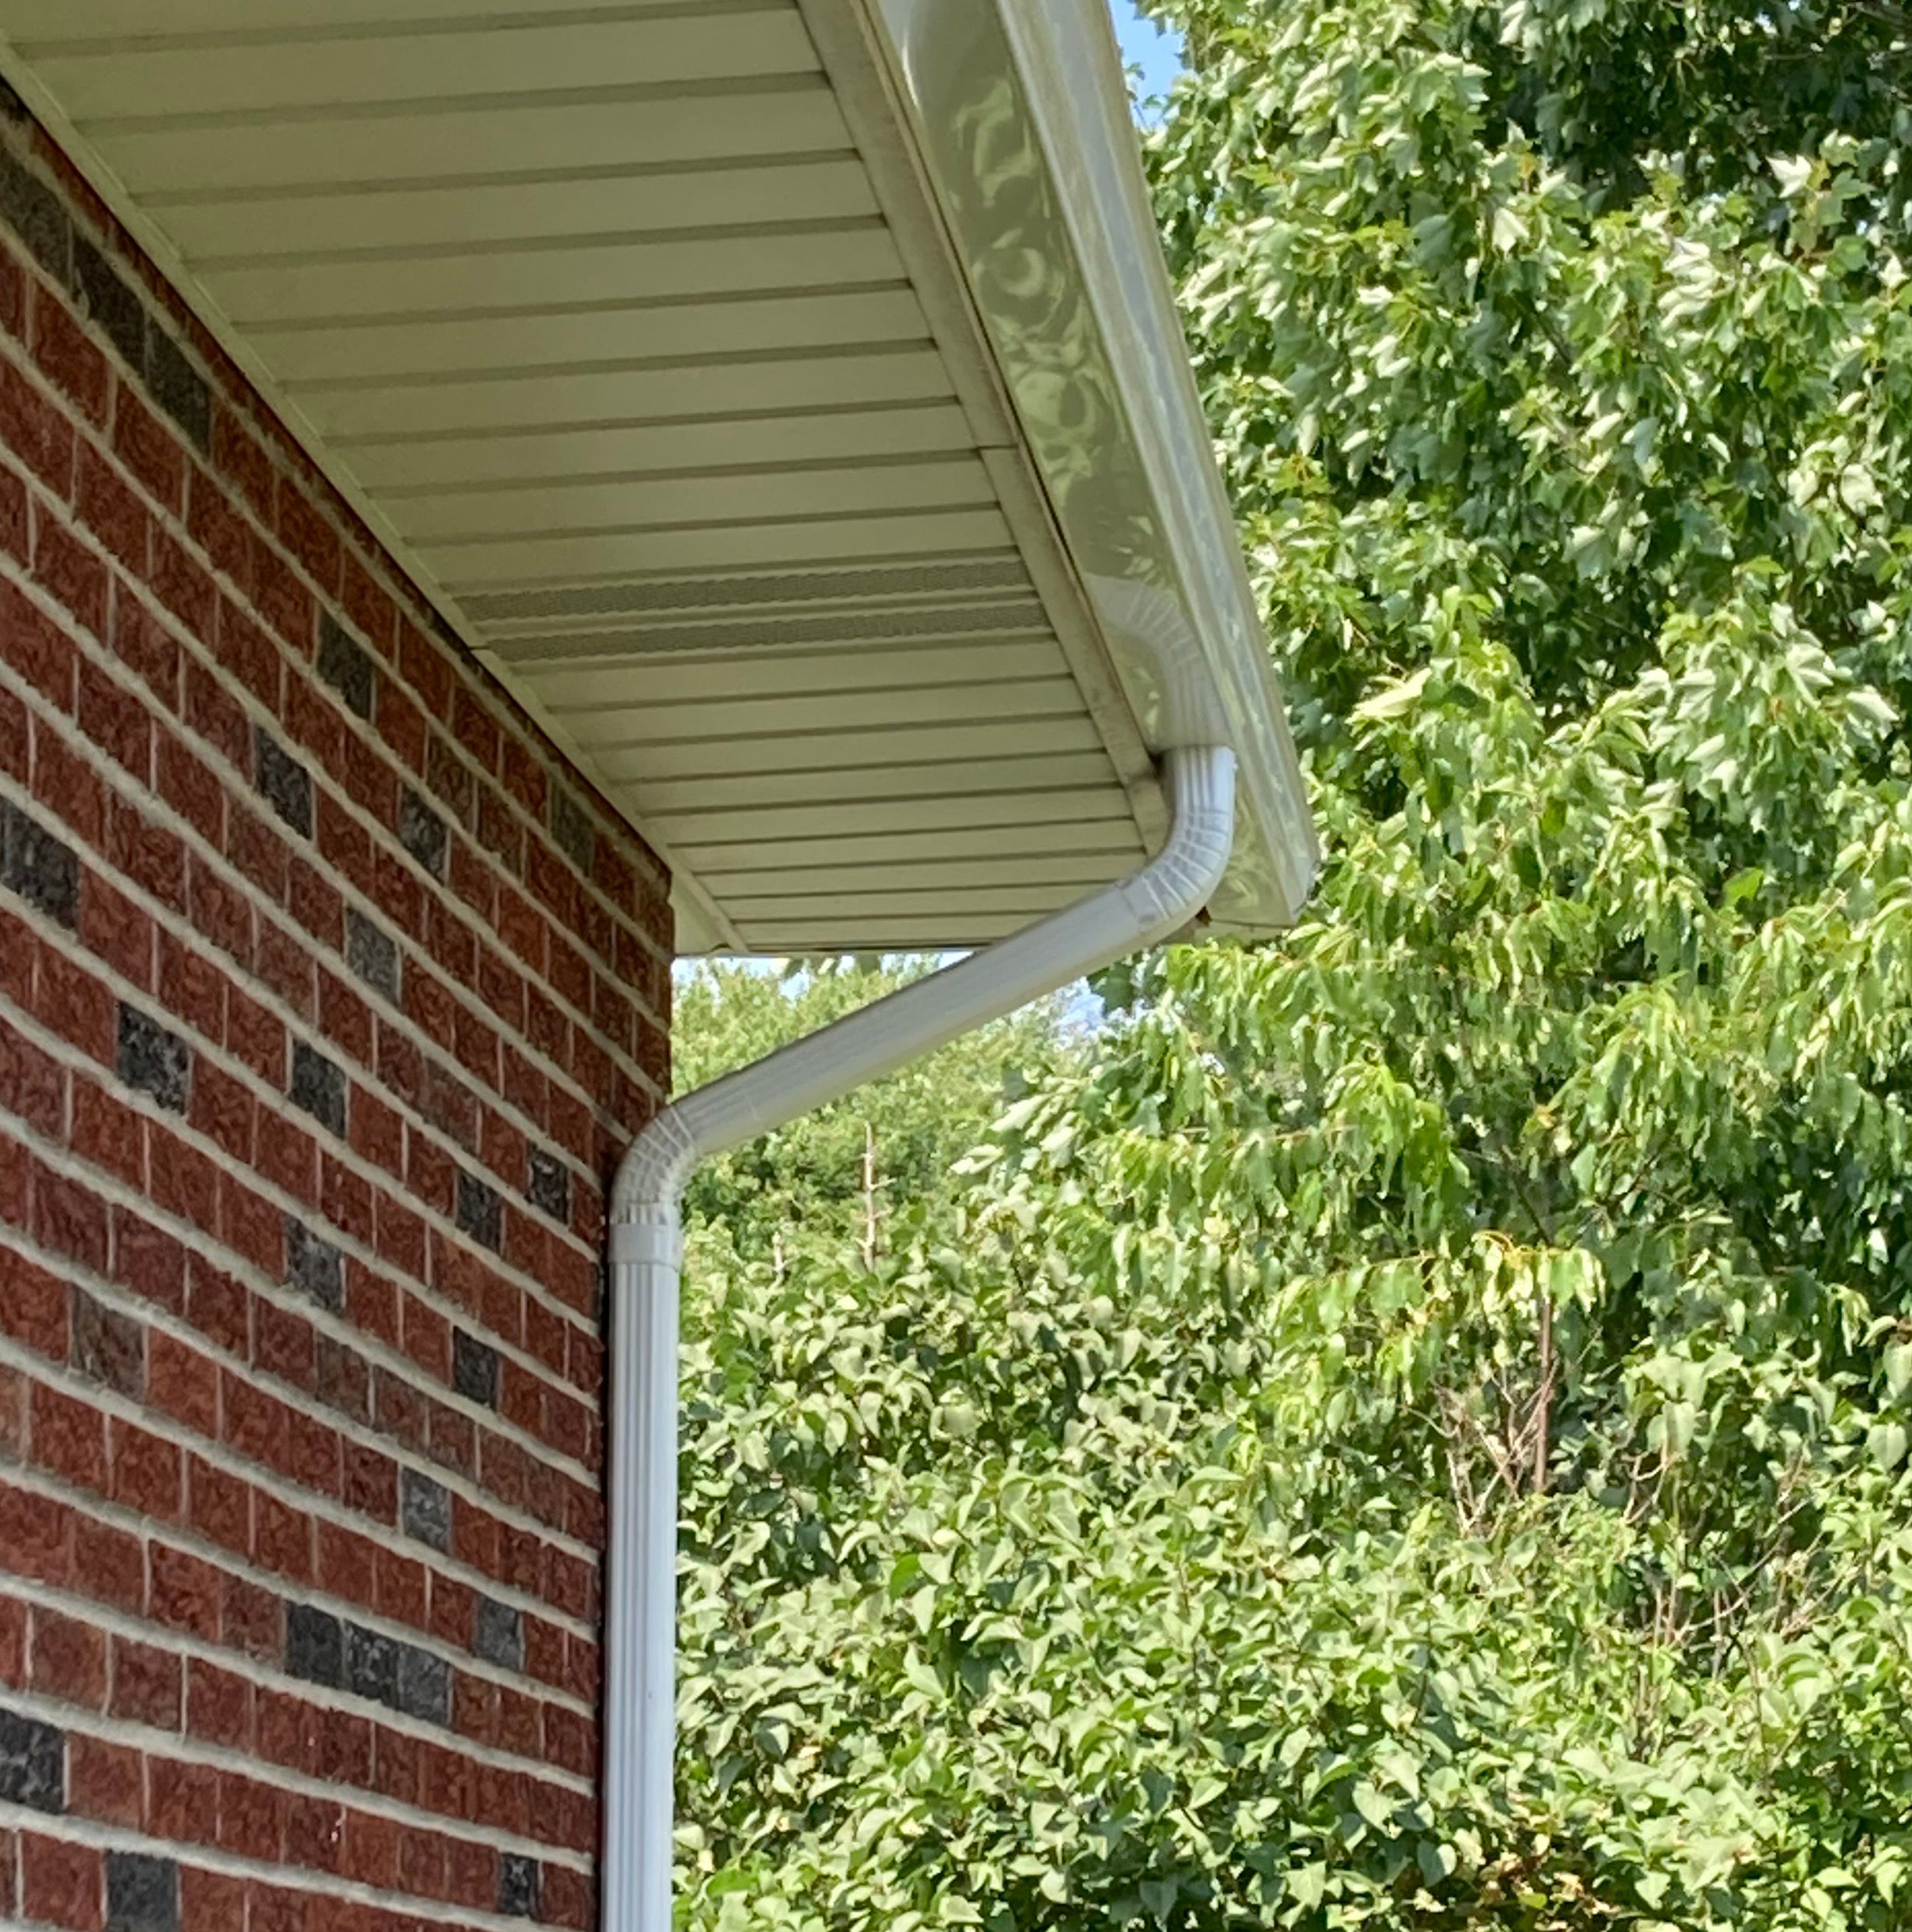 Brick exterior home with new gutters and downspouts.